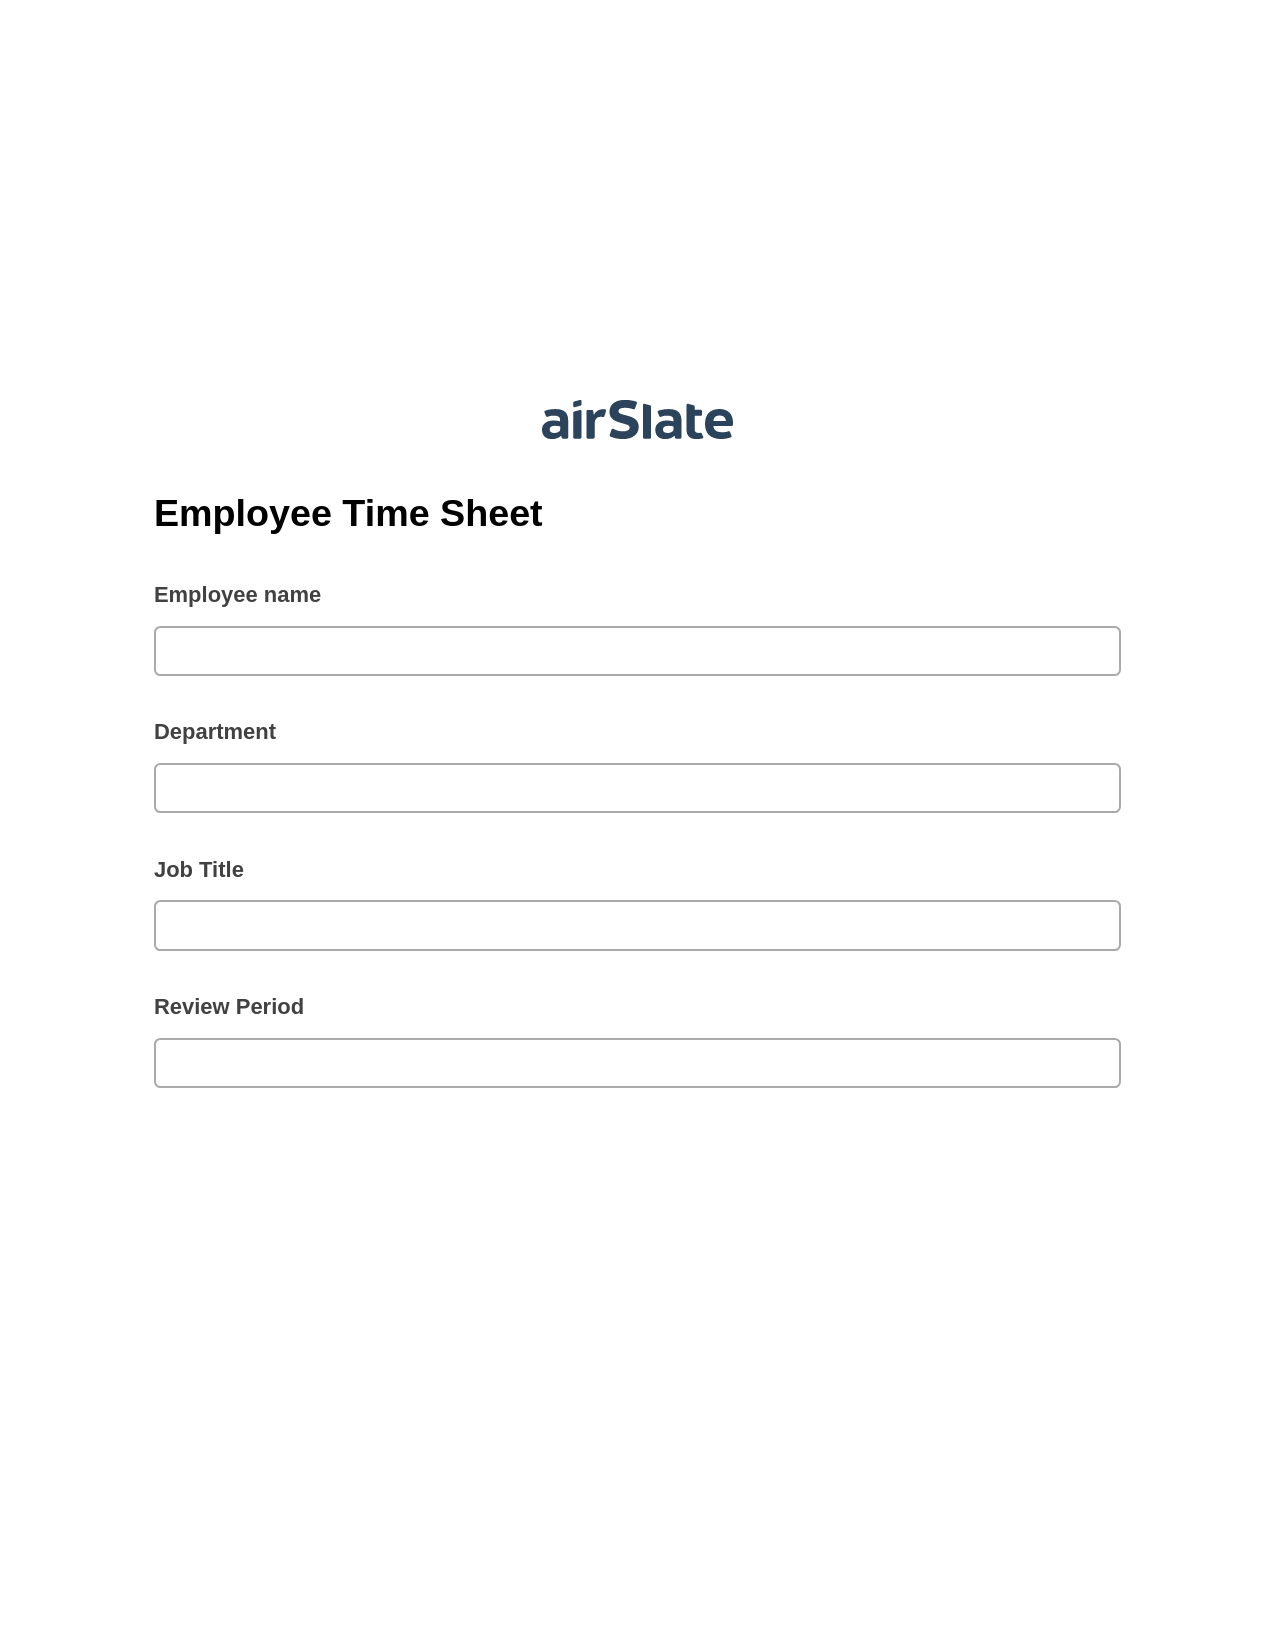 Employee Time Sheet Pre-fill from MySQL Bot, Update Audit Trail Bot, Export to Salesforce Record Bot